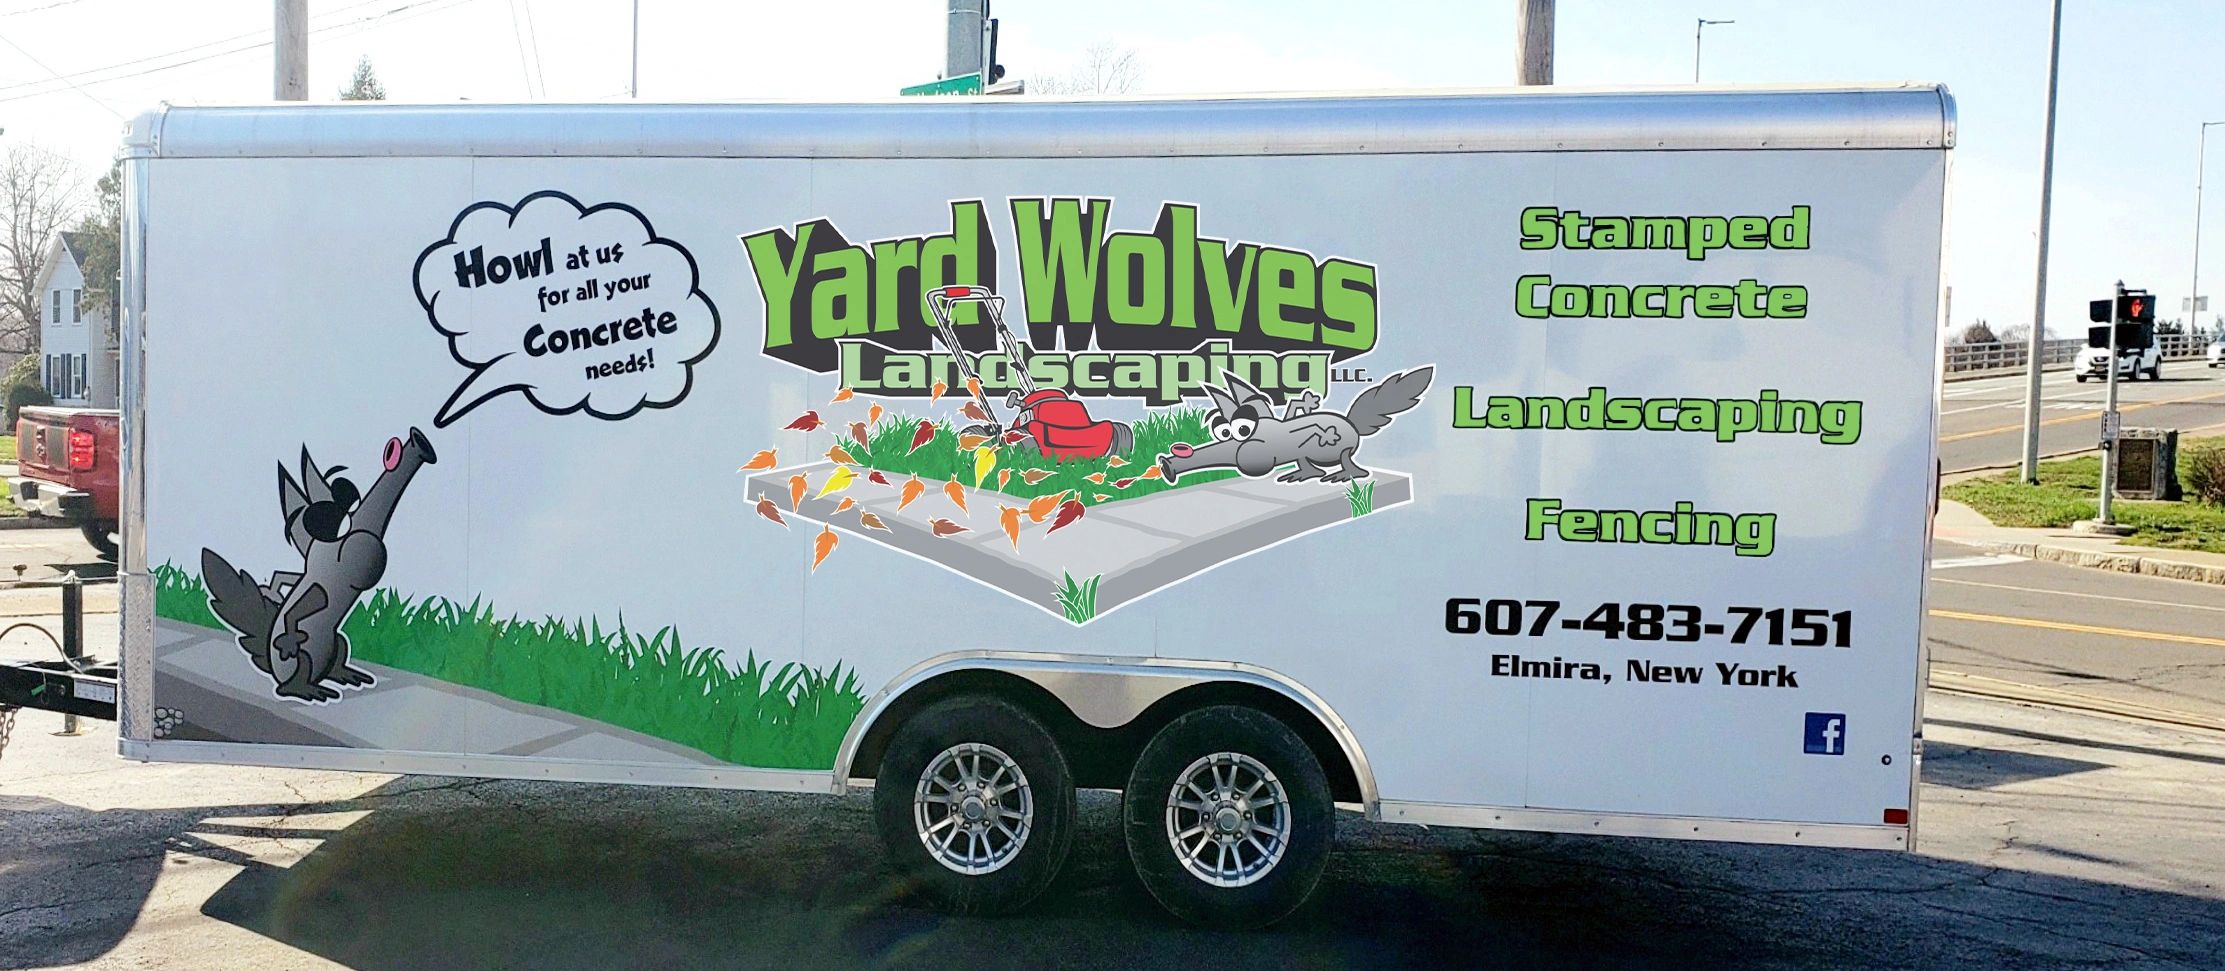 Yard Wolves Landscaping trailer showing services: stamped concrete, landscaping, fencing. 